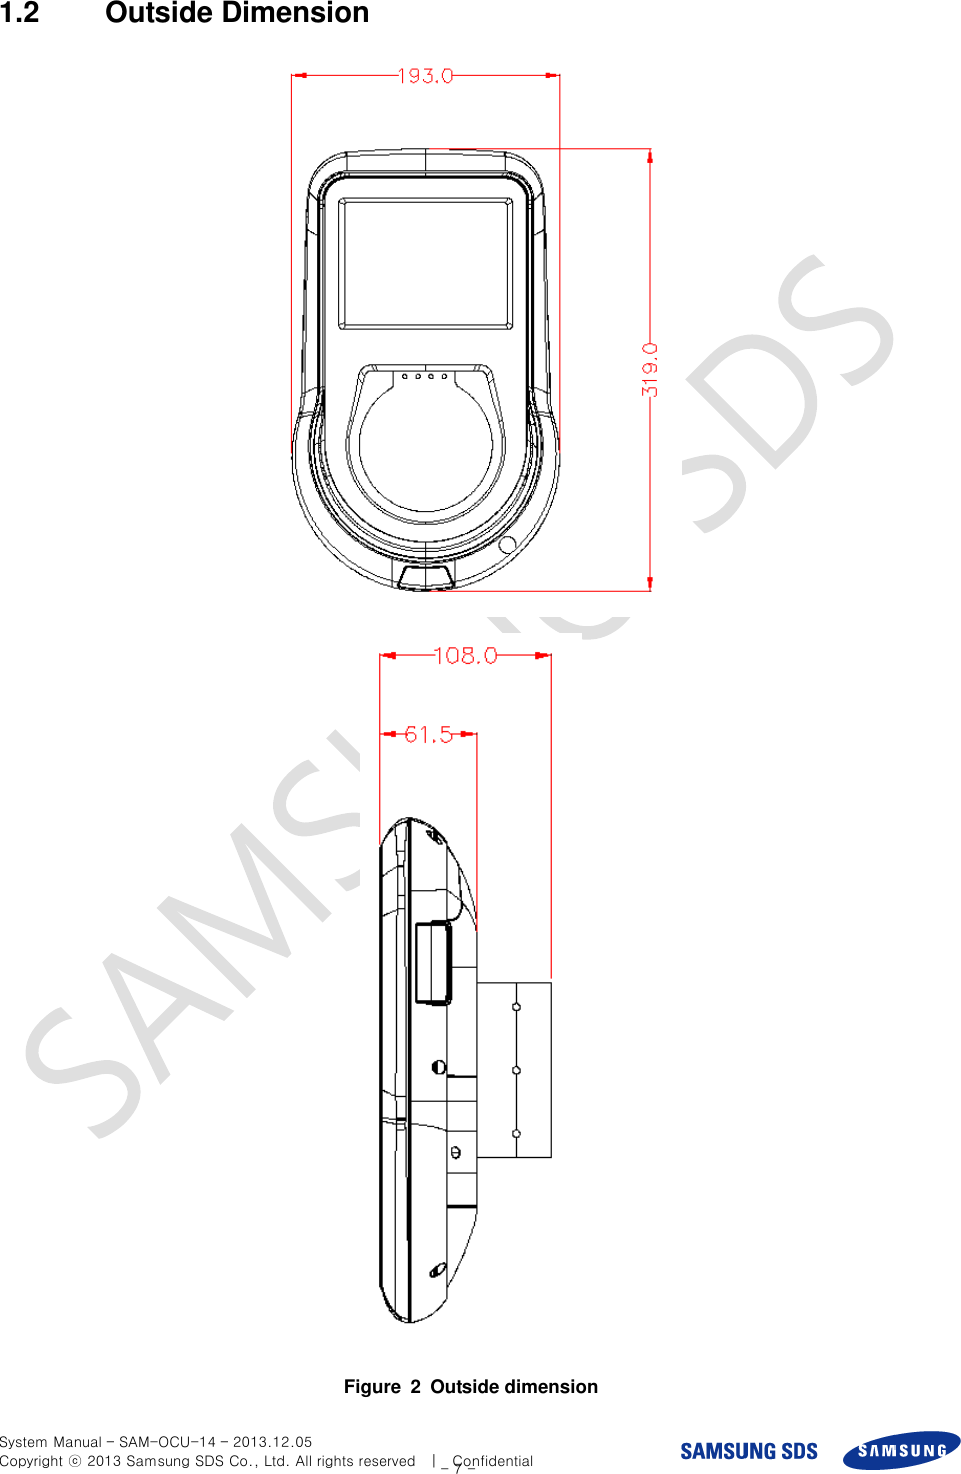  System Manual – SAM-OCU-14 – 2013.12.05 Copyright ⓒ 2013 Samsung SDS Co., Ltd. All rights reserved    |    Confidential - 7 - 1.2  Outside Dimension     Figure  2  Outside dimension 